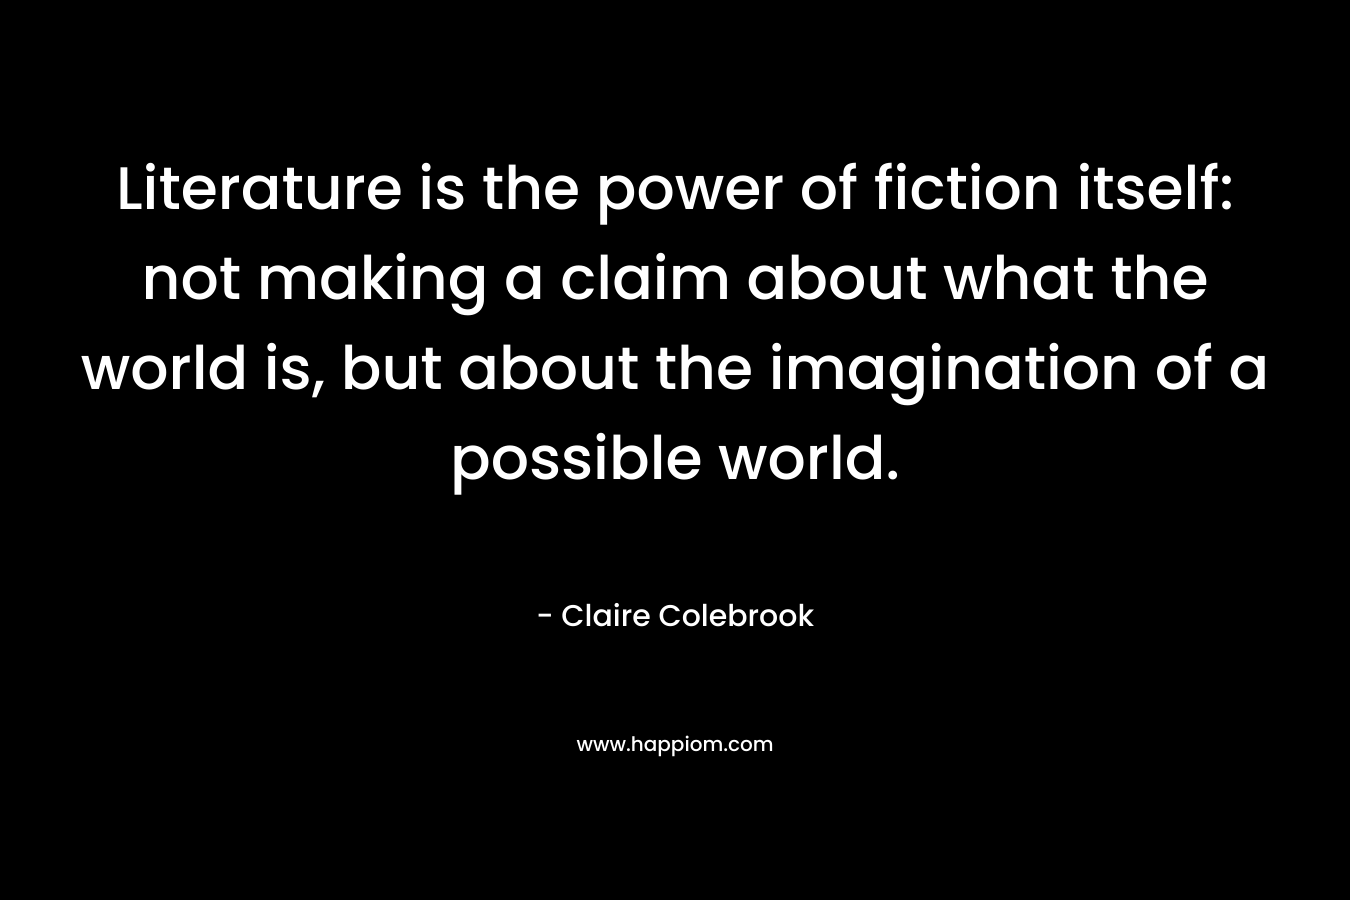 Literature is the power of fiction itself: not making a claim about what the world is, but about the imagination of a possible world.